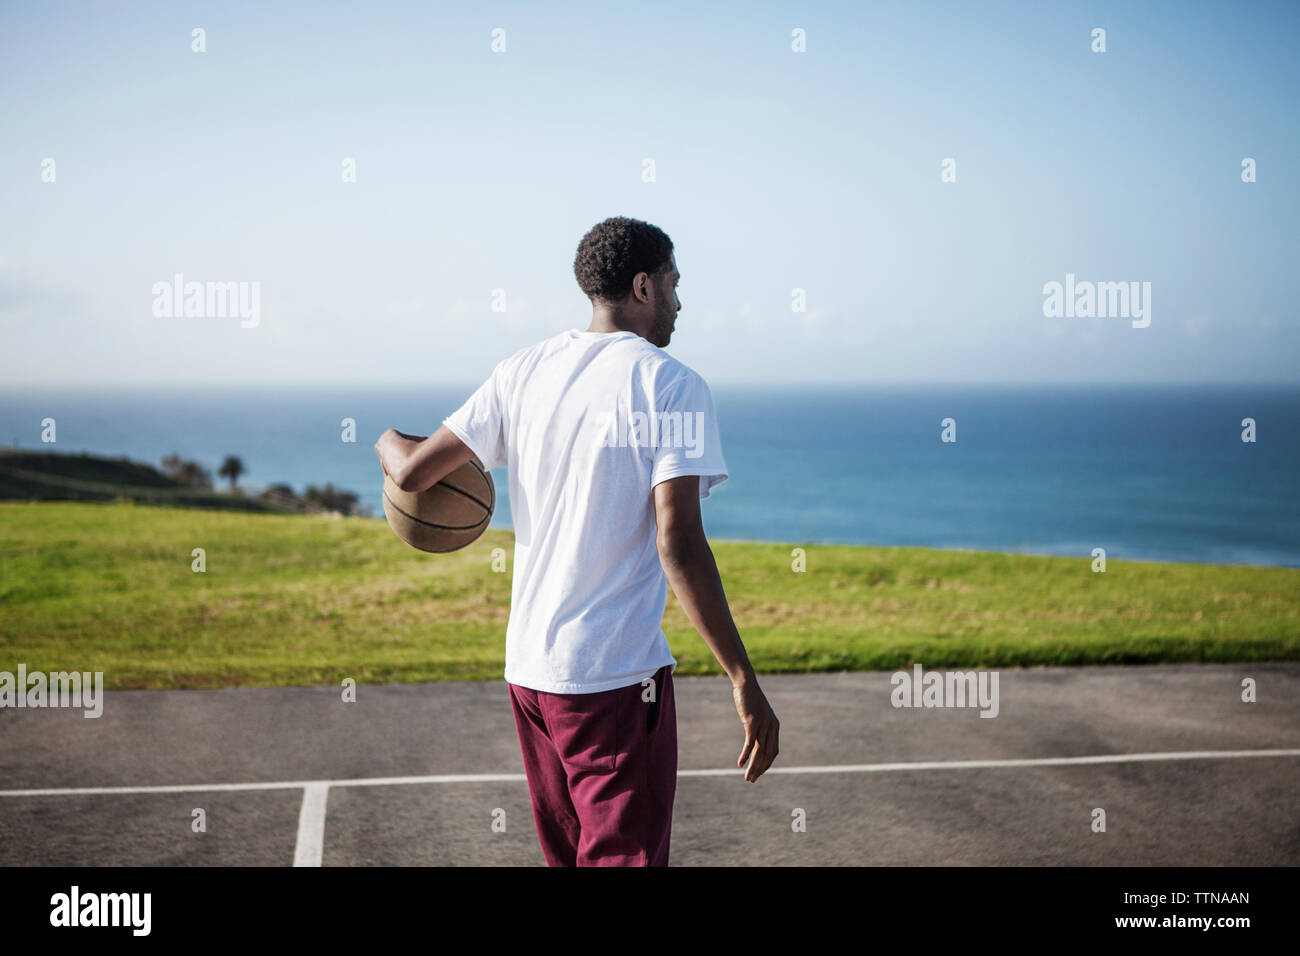 Man with basketball at court by sea against sky Stock Photo